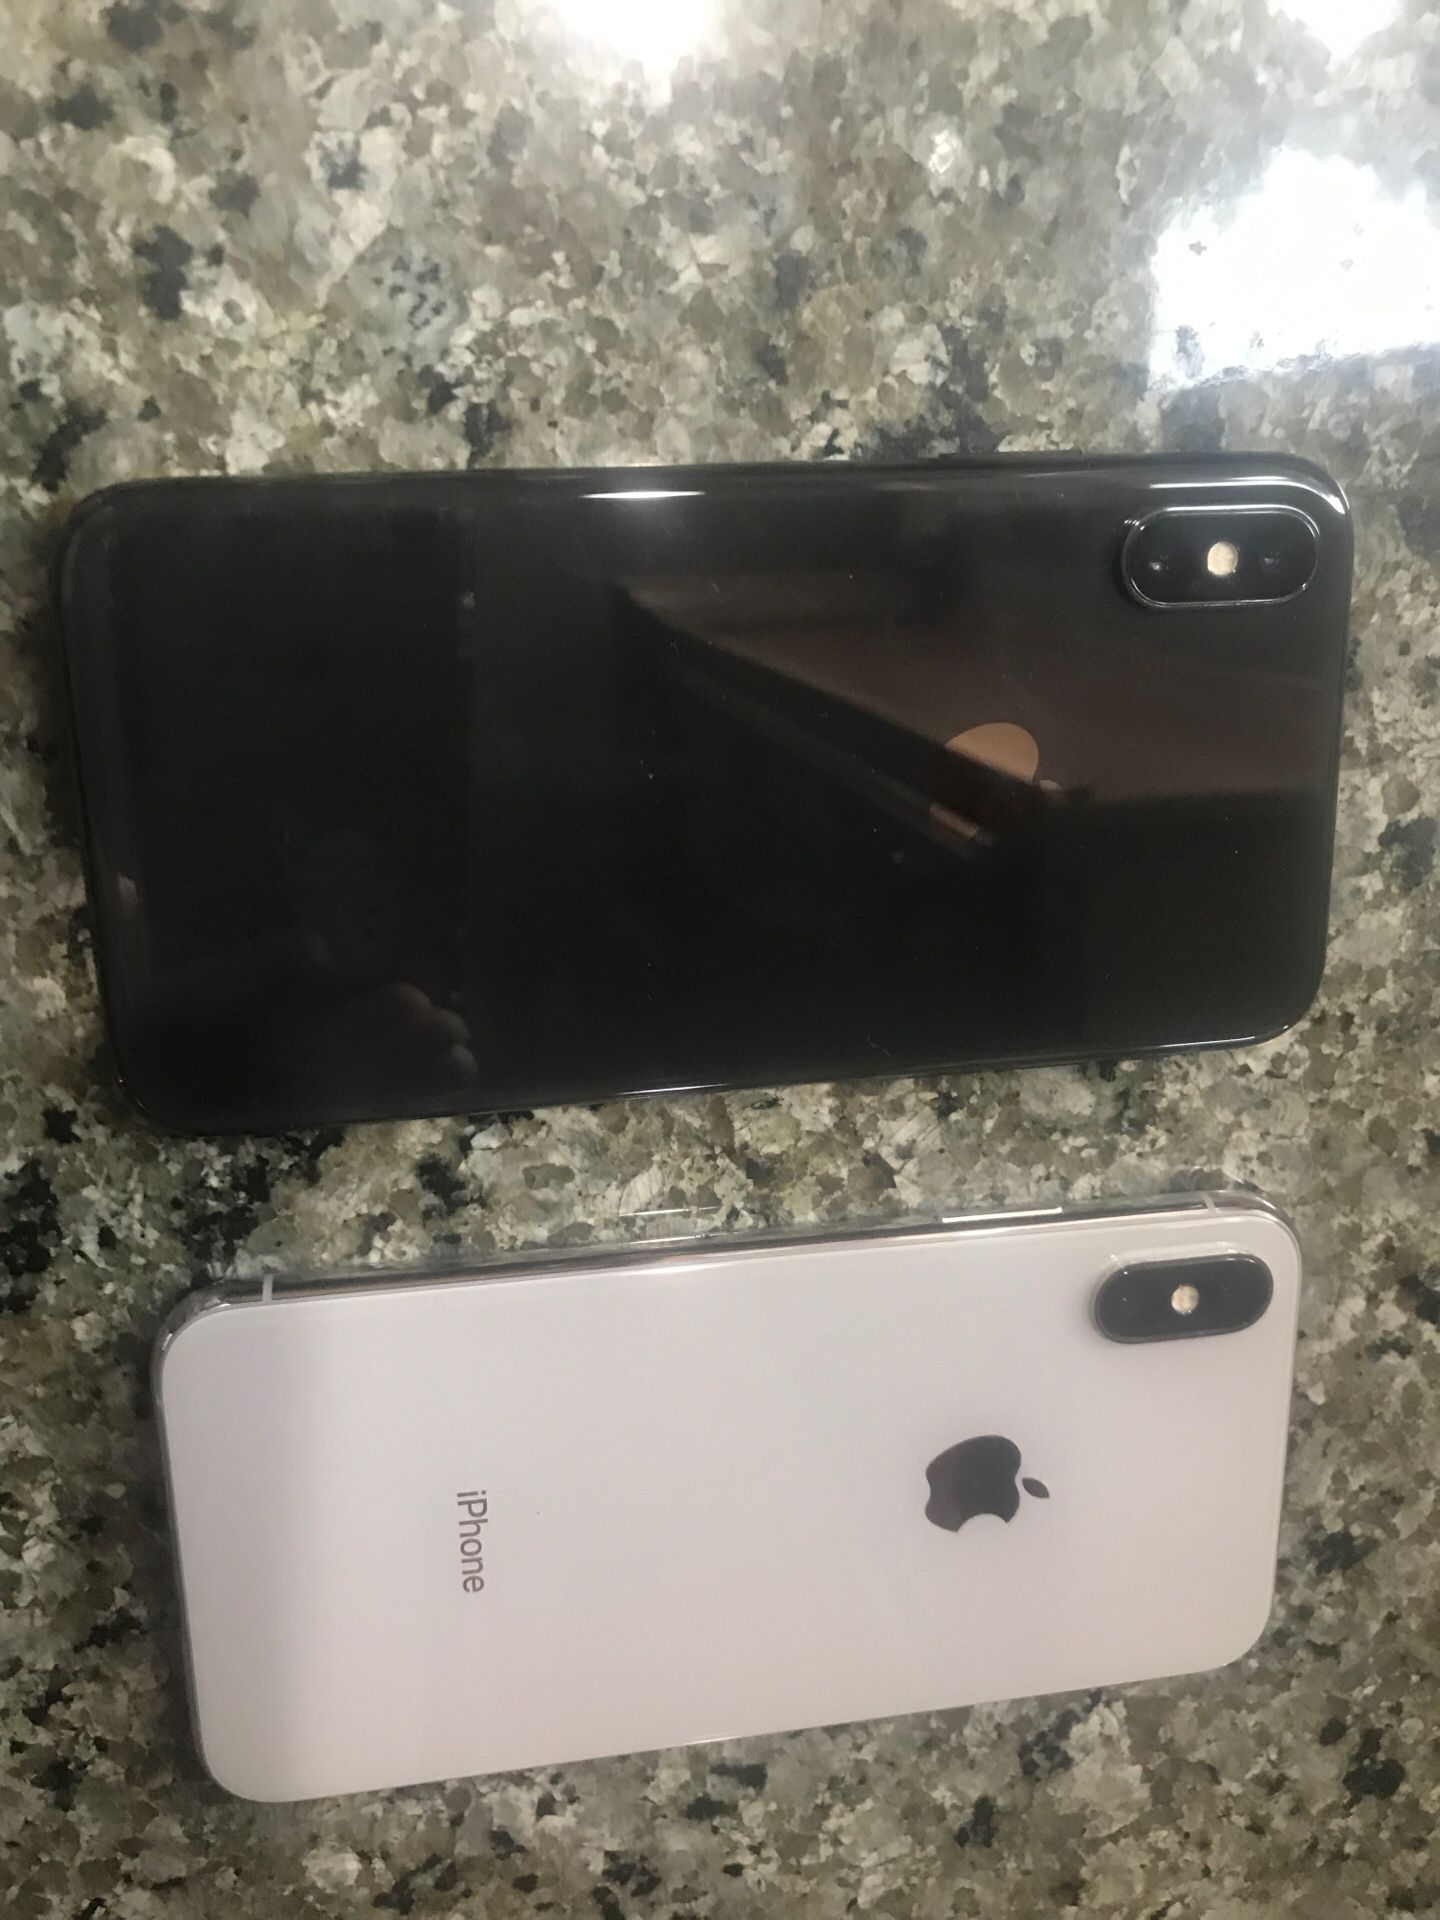 IPhone X 64 Verizon Unlocked with case one silver one black 600 each